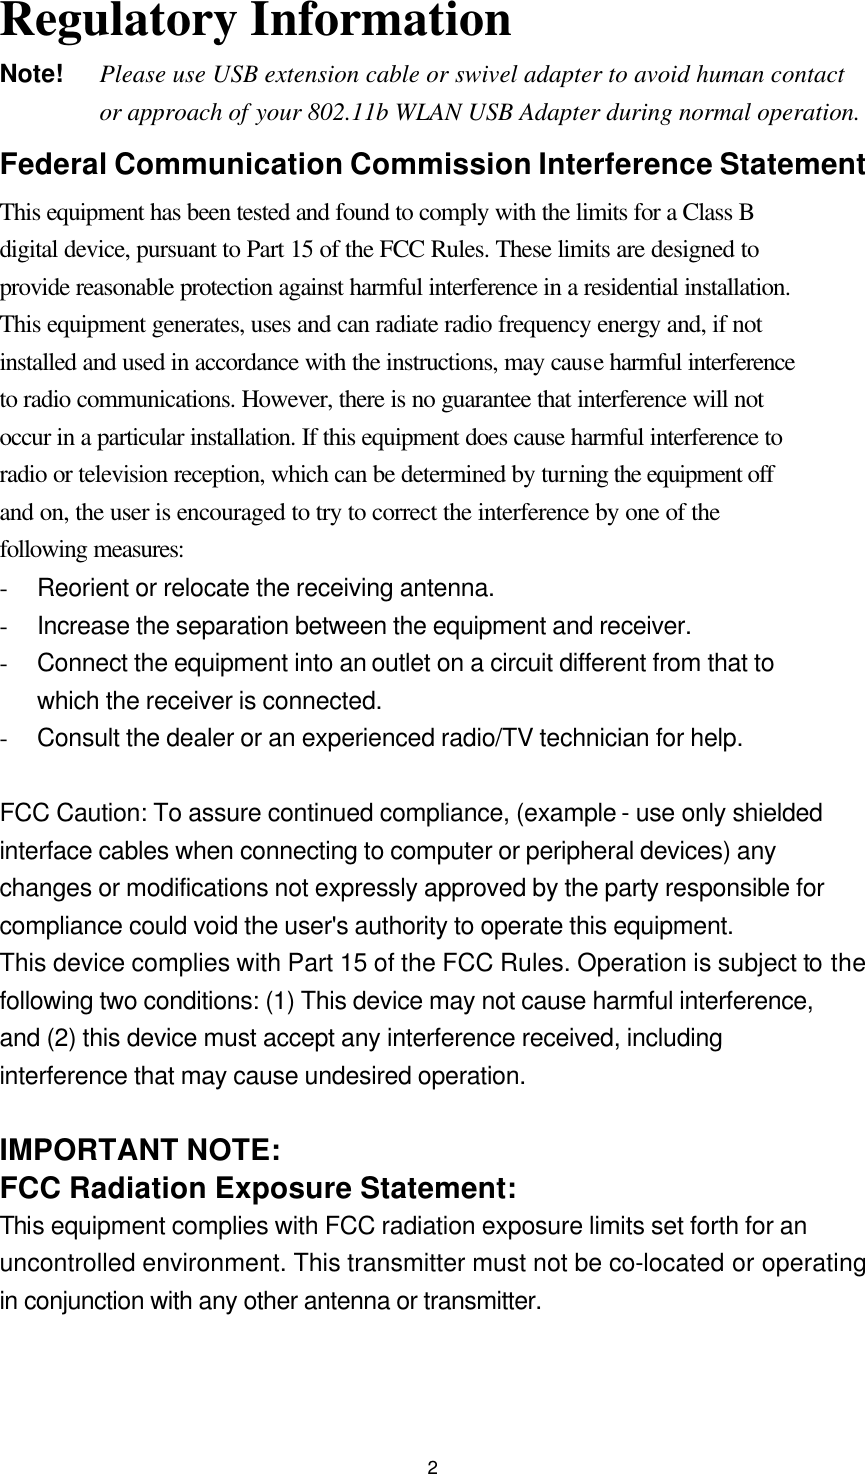  2Regulatory Information Note!    Please use USB extension cable or swivel adapter to avoid human contact or approach of your 802.11b WLAN USB Adapter during normal operation. Federal Communication Commission Interference Statement This equipment has been tested and found to comply with the limits for a Class B digital device, pursuant to Part 15 of the FCC Rules. These limits are designed to provide reasonable protection against harmful interference in a residential installation. This equipment generates, uses and can radiate radio frequency energy and, if not installed and used in accordance with the instructions, may cause harmful interference to radio communications. However, there is no guarantee that interference will not occur in a particular installation. If this equipment does cause harmful interference to radio or television reception, which can be determined by turning the equipment off and on, the user is encouraged to try to correct the interference by one of the following measures: - Reorient or relocate the receiving antenna. - Increase the separation between the equipment and receiver. - Connect the equipment into an outlet on a circuit different from that to which the receiver is connected. - Consult the dealer or an experienced radio/TV technician for help.  FCC Caution: To assure continued compliance, (example - use only shielded interface cables when connecting to computer or peripheral devices) any changes or modifications not expressly approved by the party responsible for compliance could void the user&apos;s authority to operate this equipment. This device complies with Part 15 of the FCC Rules. Operation is subject to the following two conditions: (1) This device may not cause harmful interference, and (2) this device must accept any interference received, including interference that may cause undesired operation.  IMPORTANT NOTE: FCC Radiation Exposure Statement: This equipment complies with FCC radiation exposure limits set forth for an uncontrolled environment. This transmitter must not be co-located or operating in conjunction with any other antenna or transmitter. 